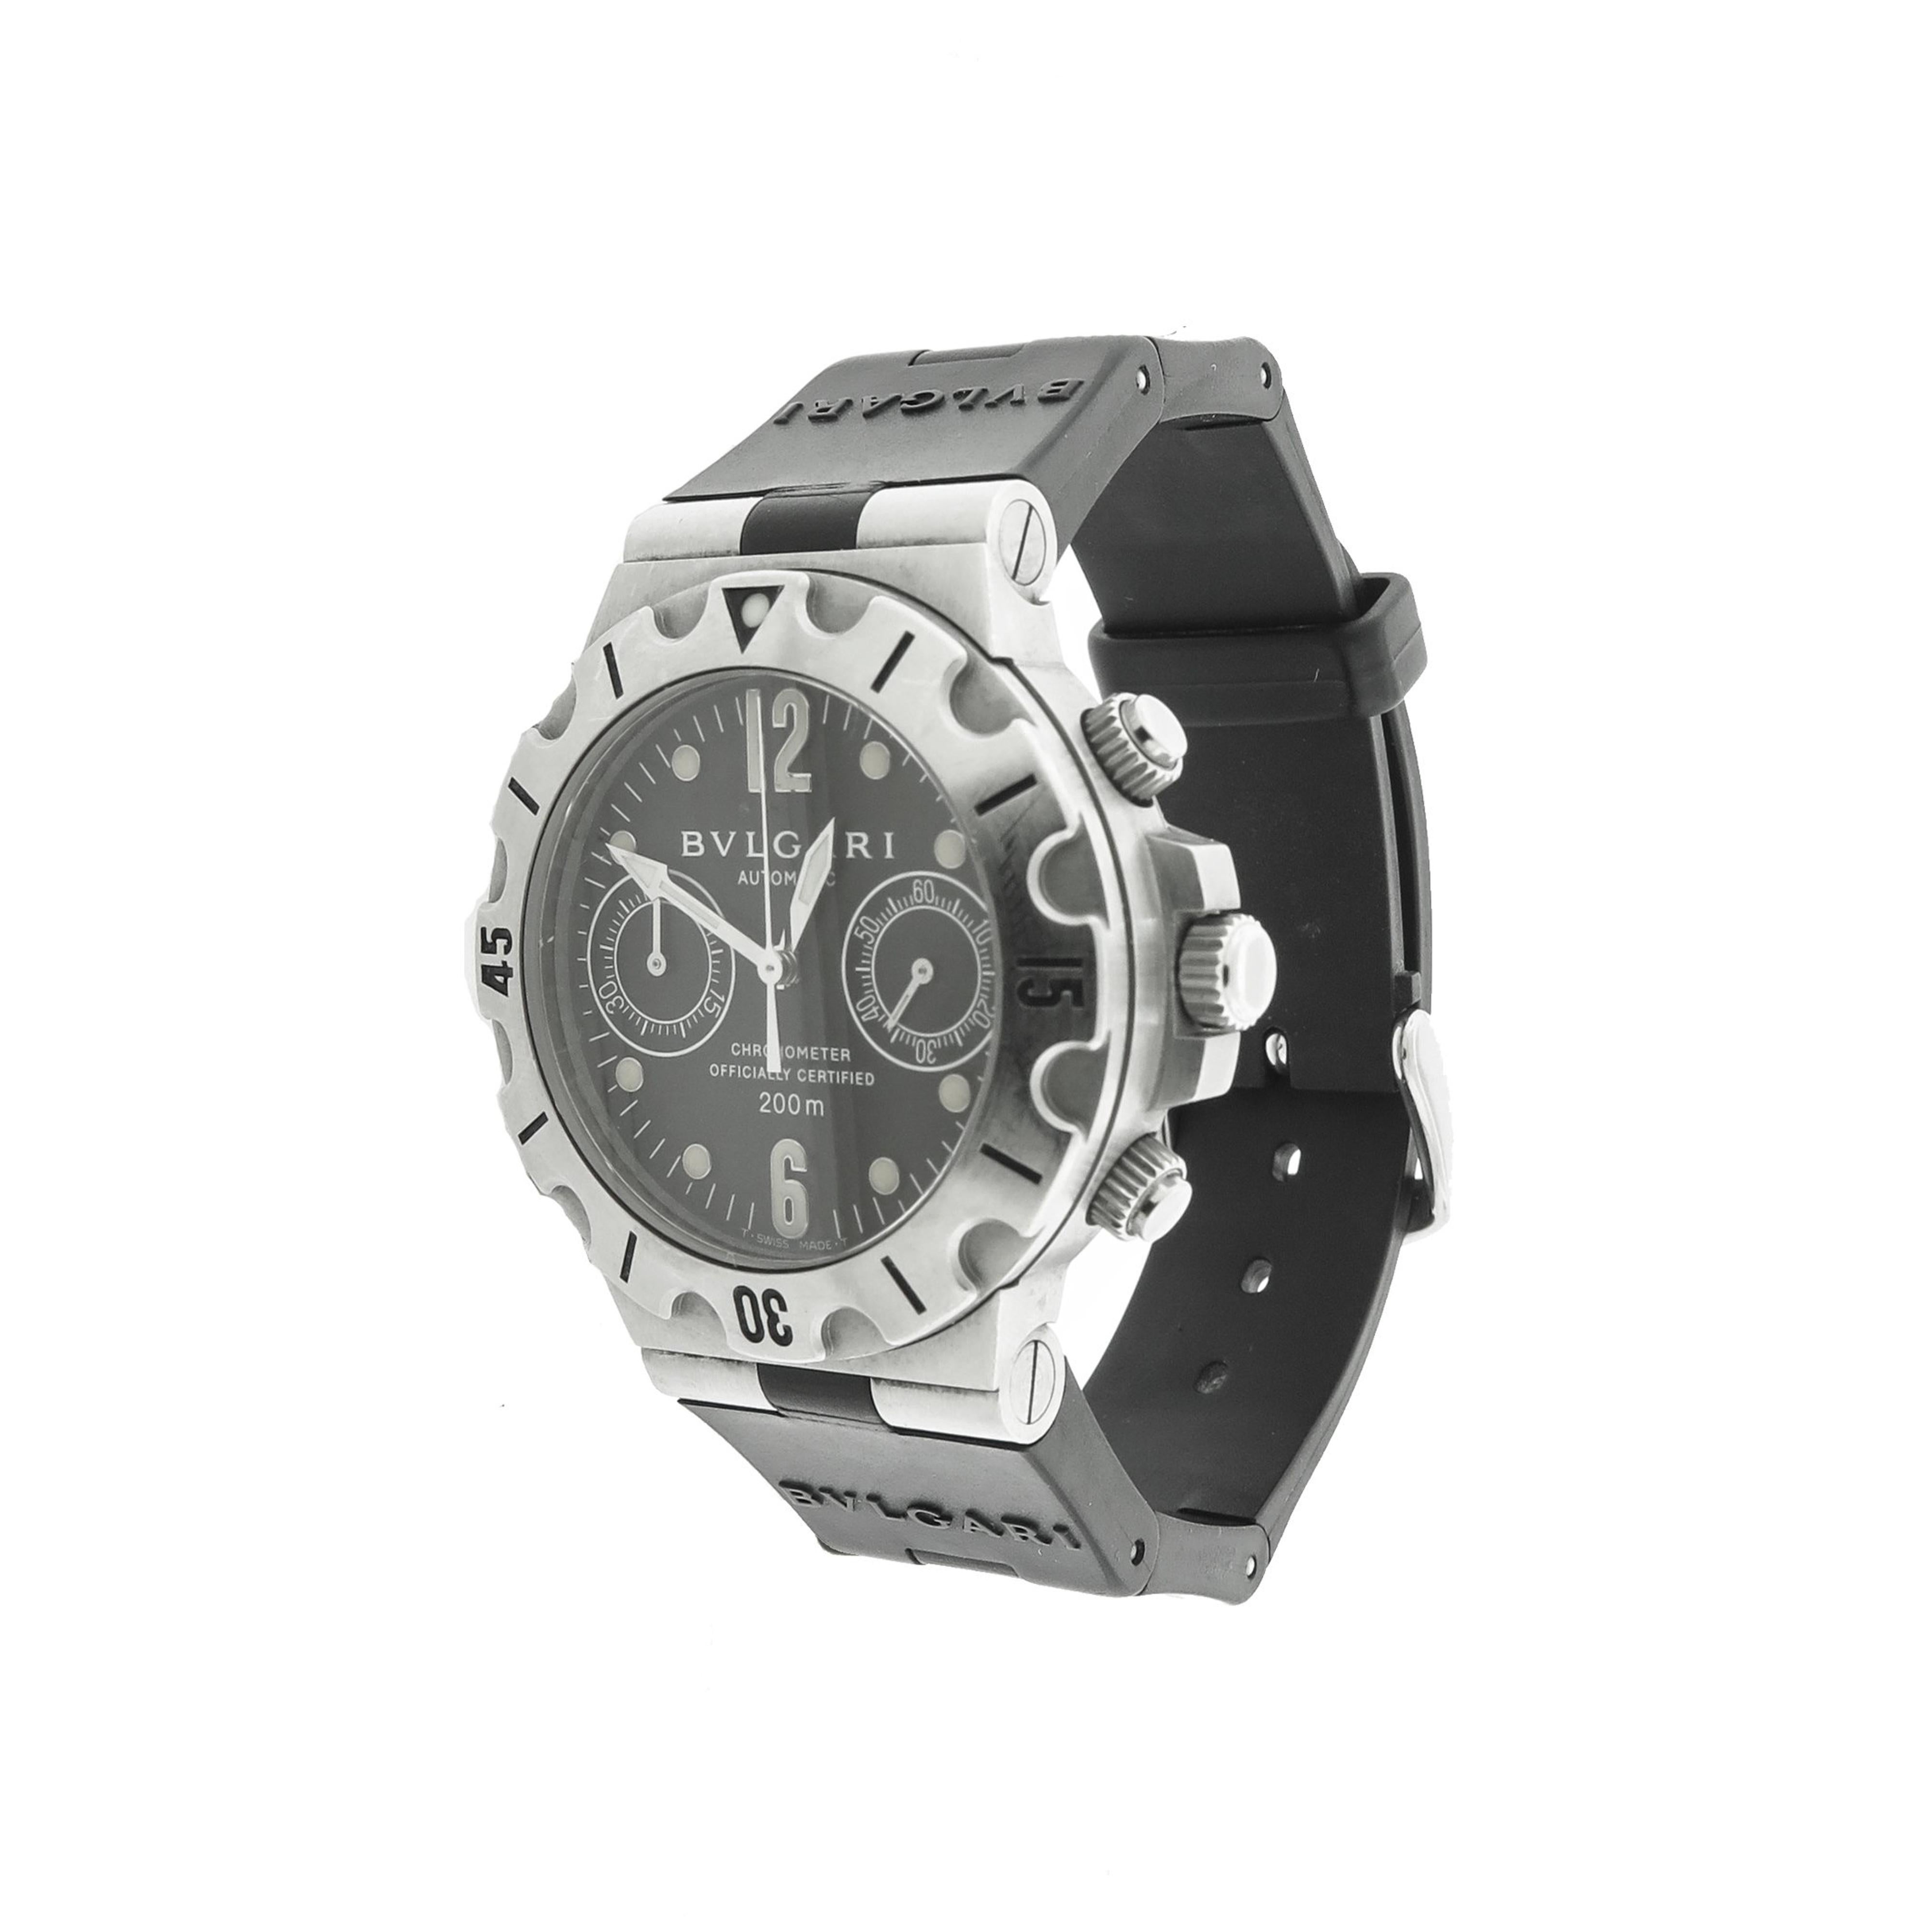 Bvlgari Scuba crafted in stainless steel.  This timepiece features a self-winding movement with indications for the Hours, Minutes, Small Seconds, 45 Minute Chronograph and Uni-Directional Timers Bezel.  With screw down crown and pushers this watch